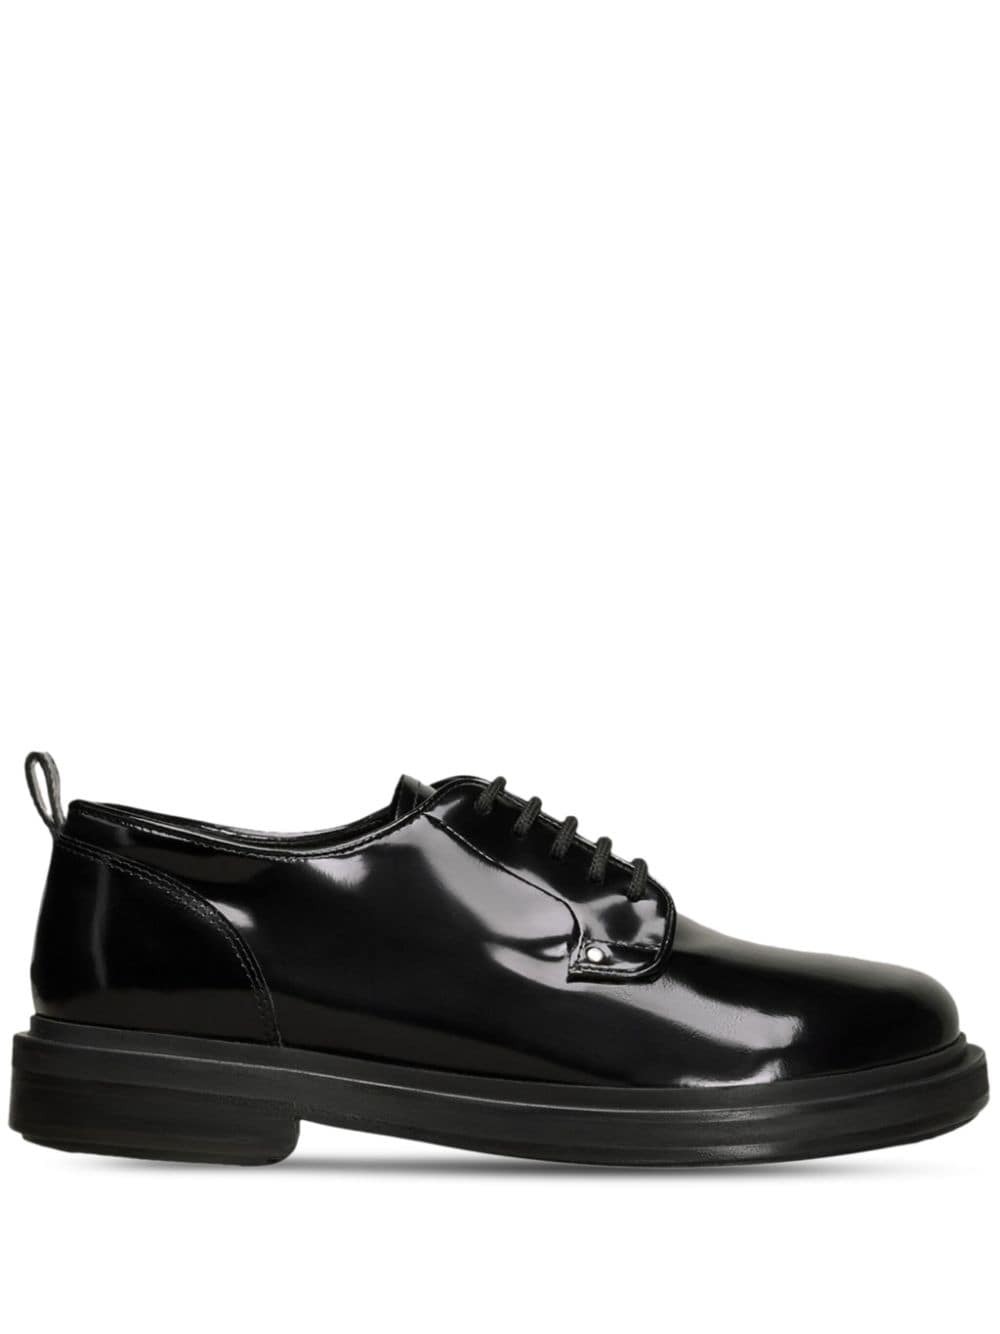 Ami Alexandre Mattiussi Lace-up Leather Trainers In Black